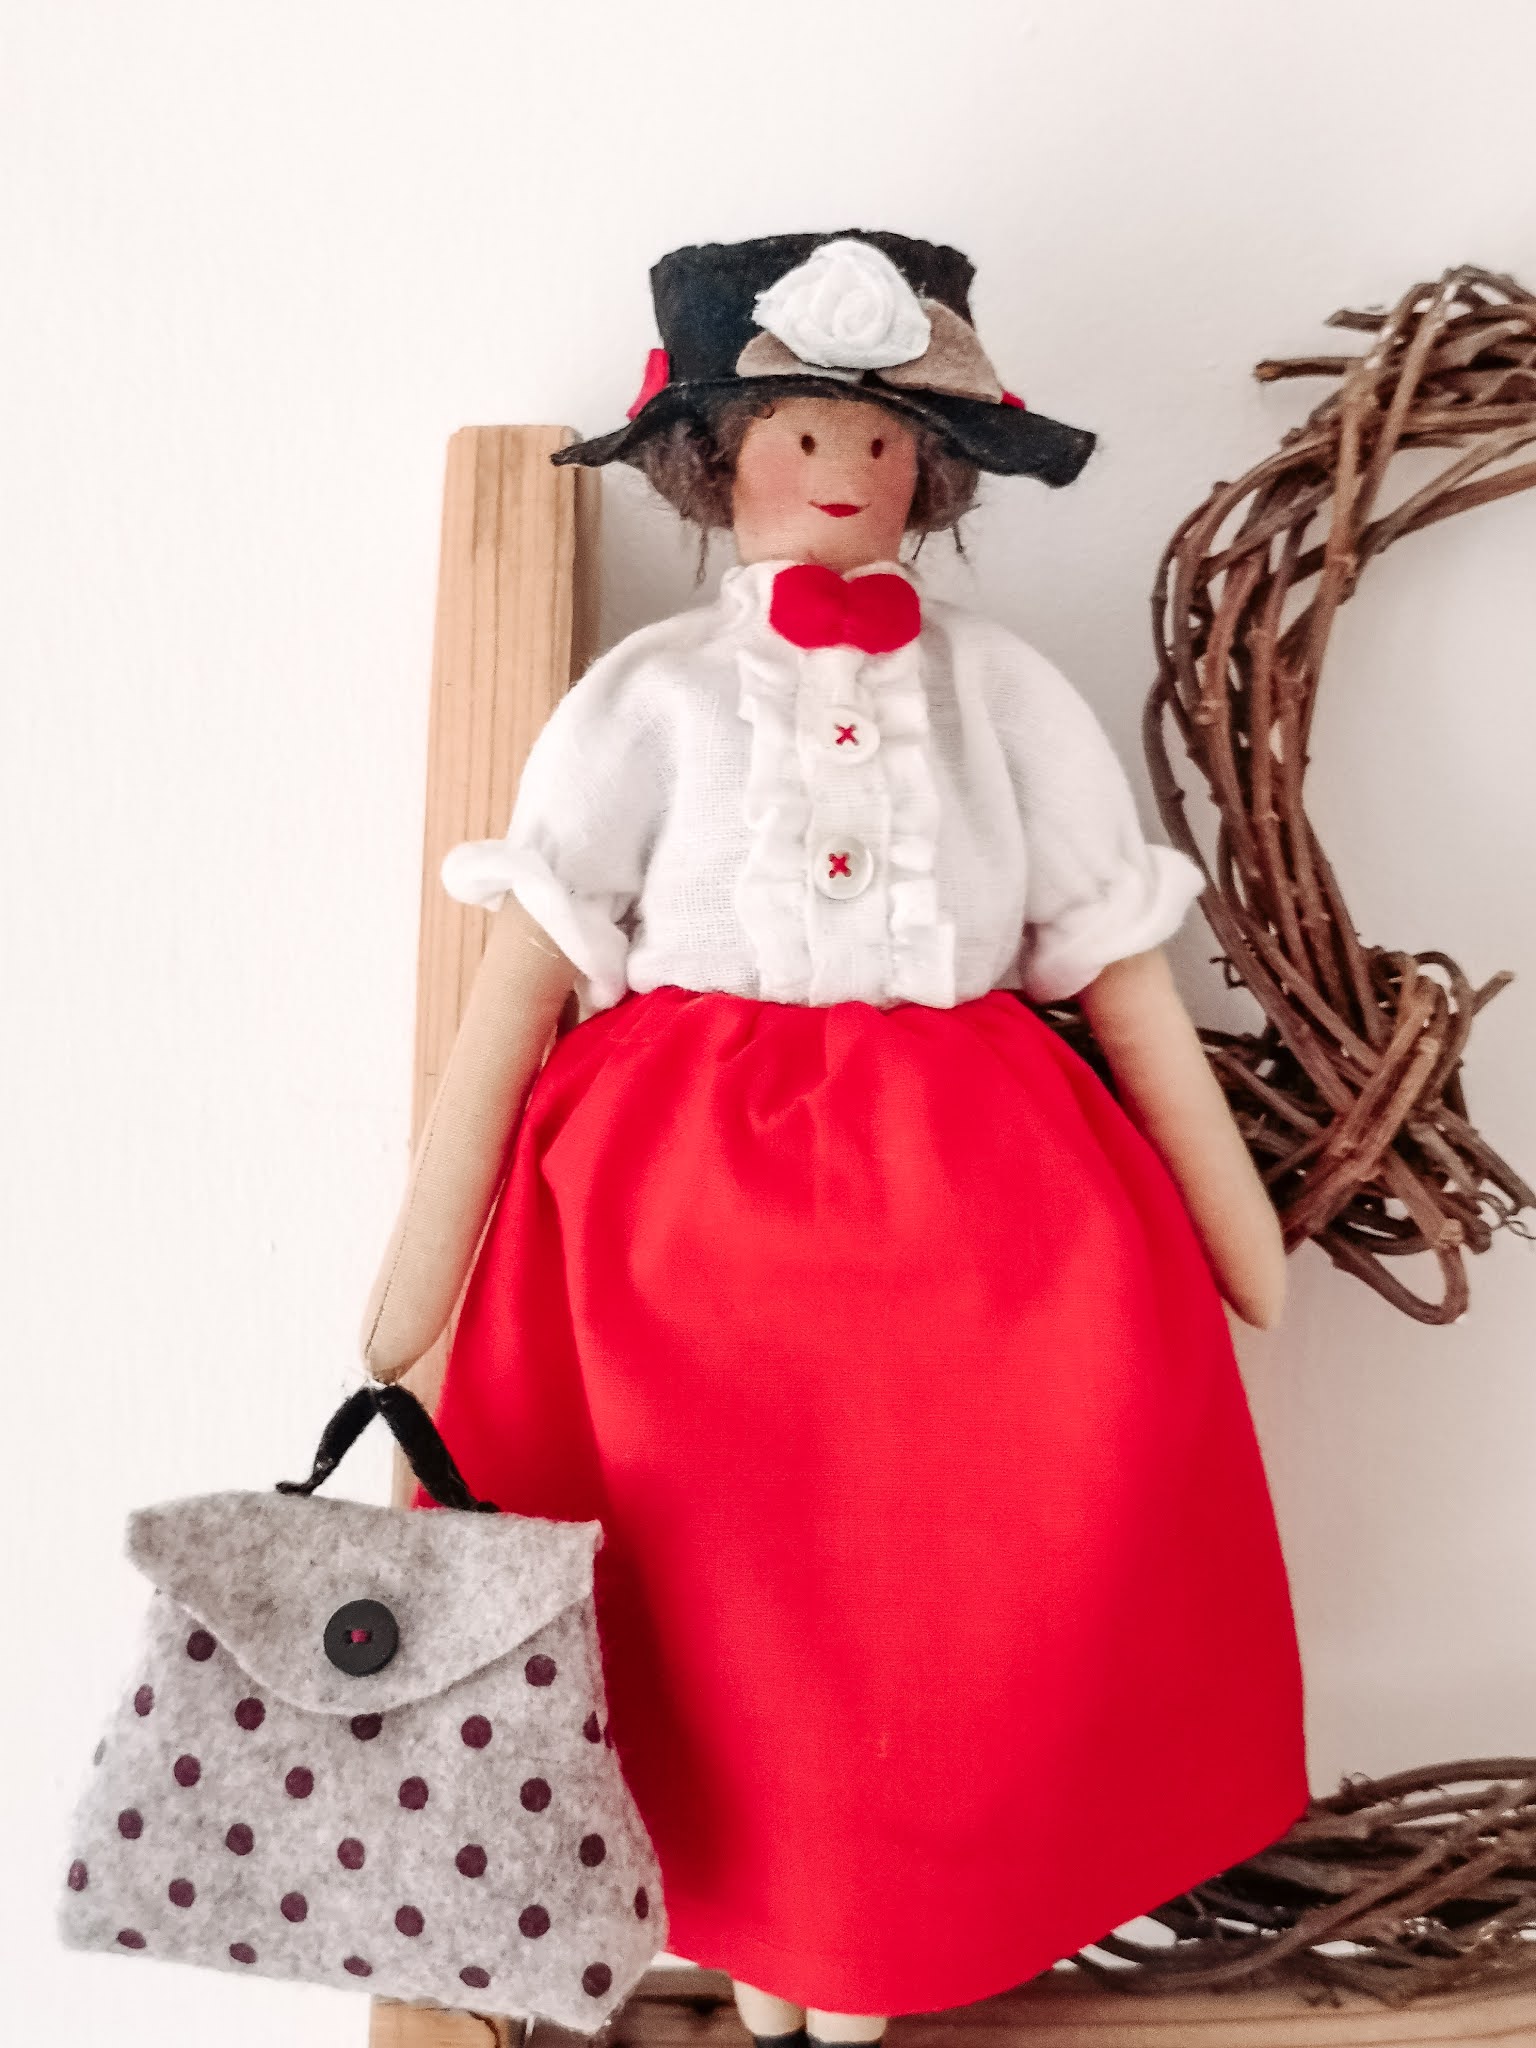 Laura country style: Mary Poppins {Pdf sewing pattern file}